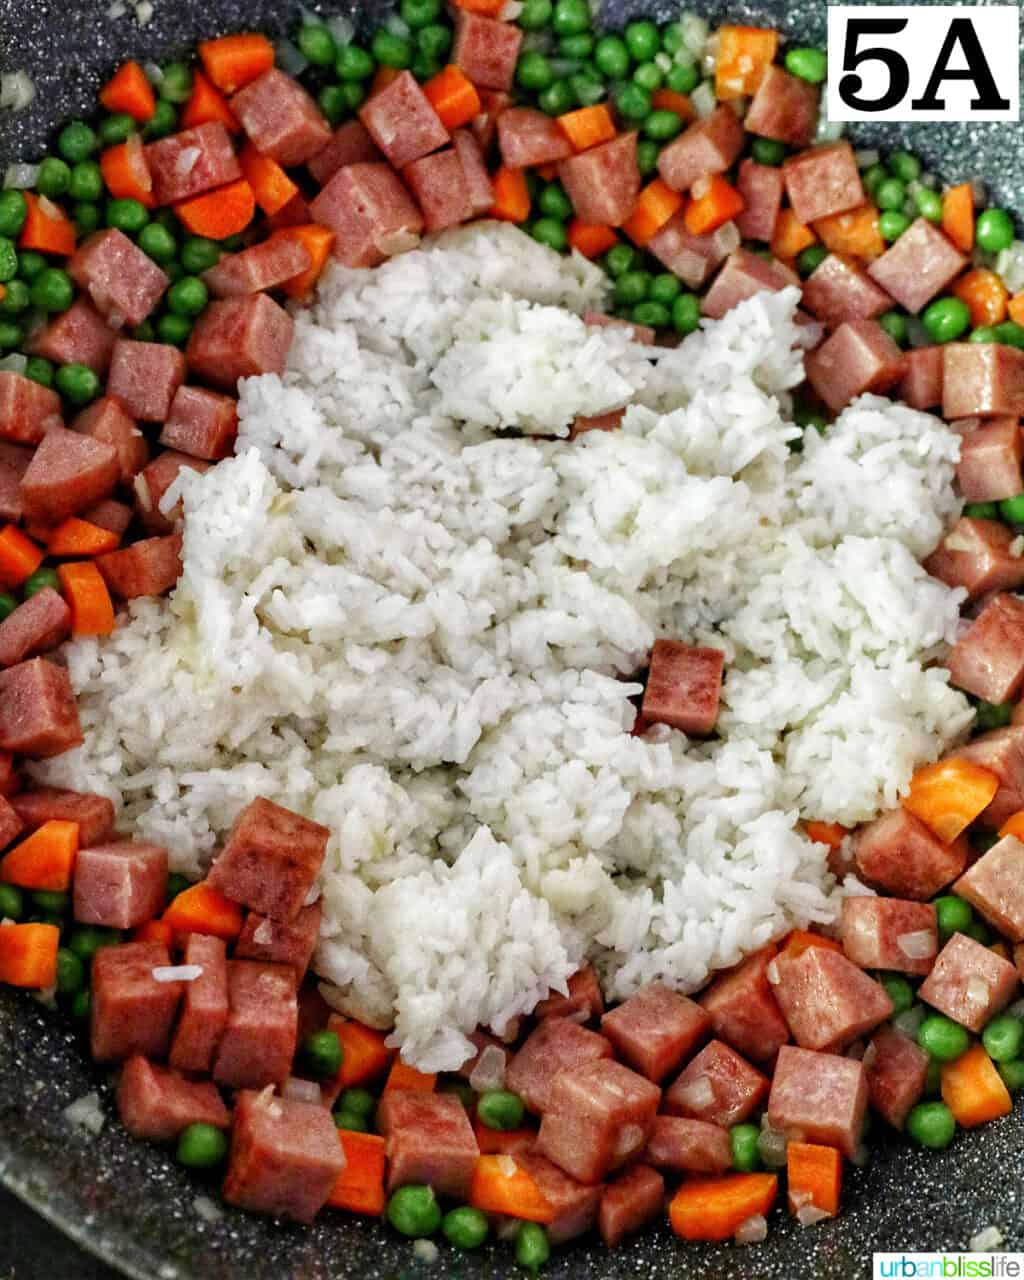 adding rice to cooking cubed spam, garlic, onions, peas, and carrots in a wok.